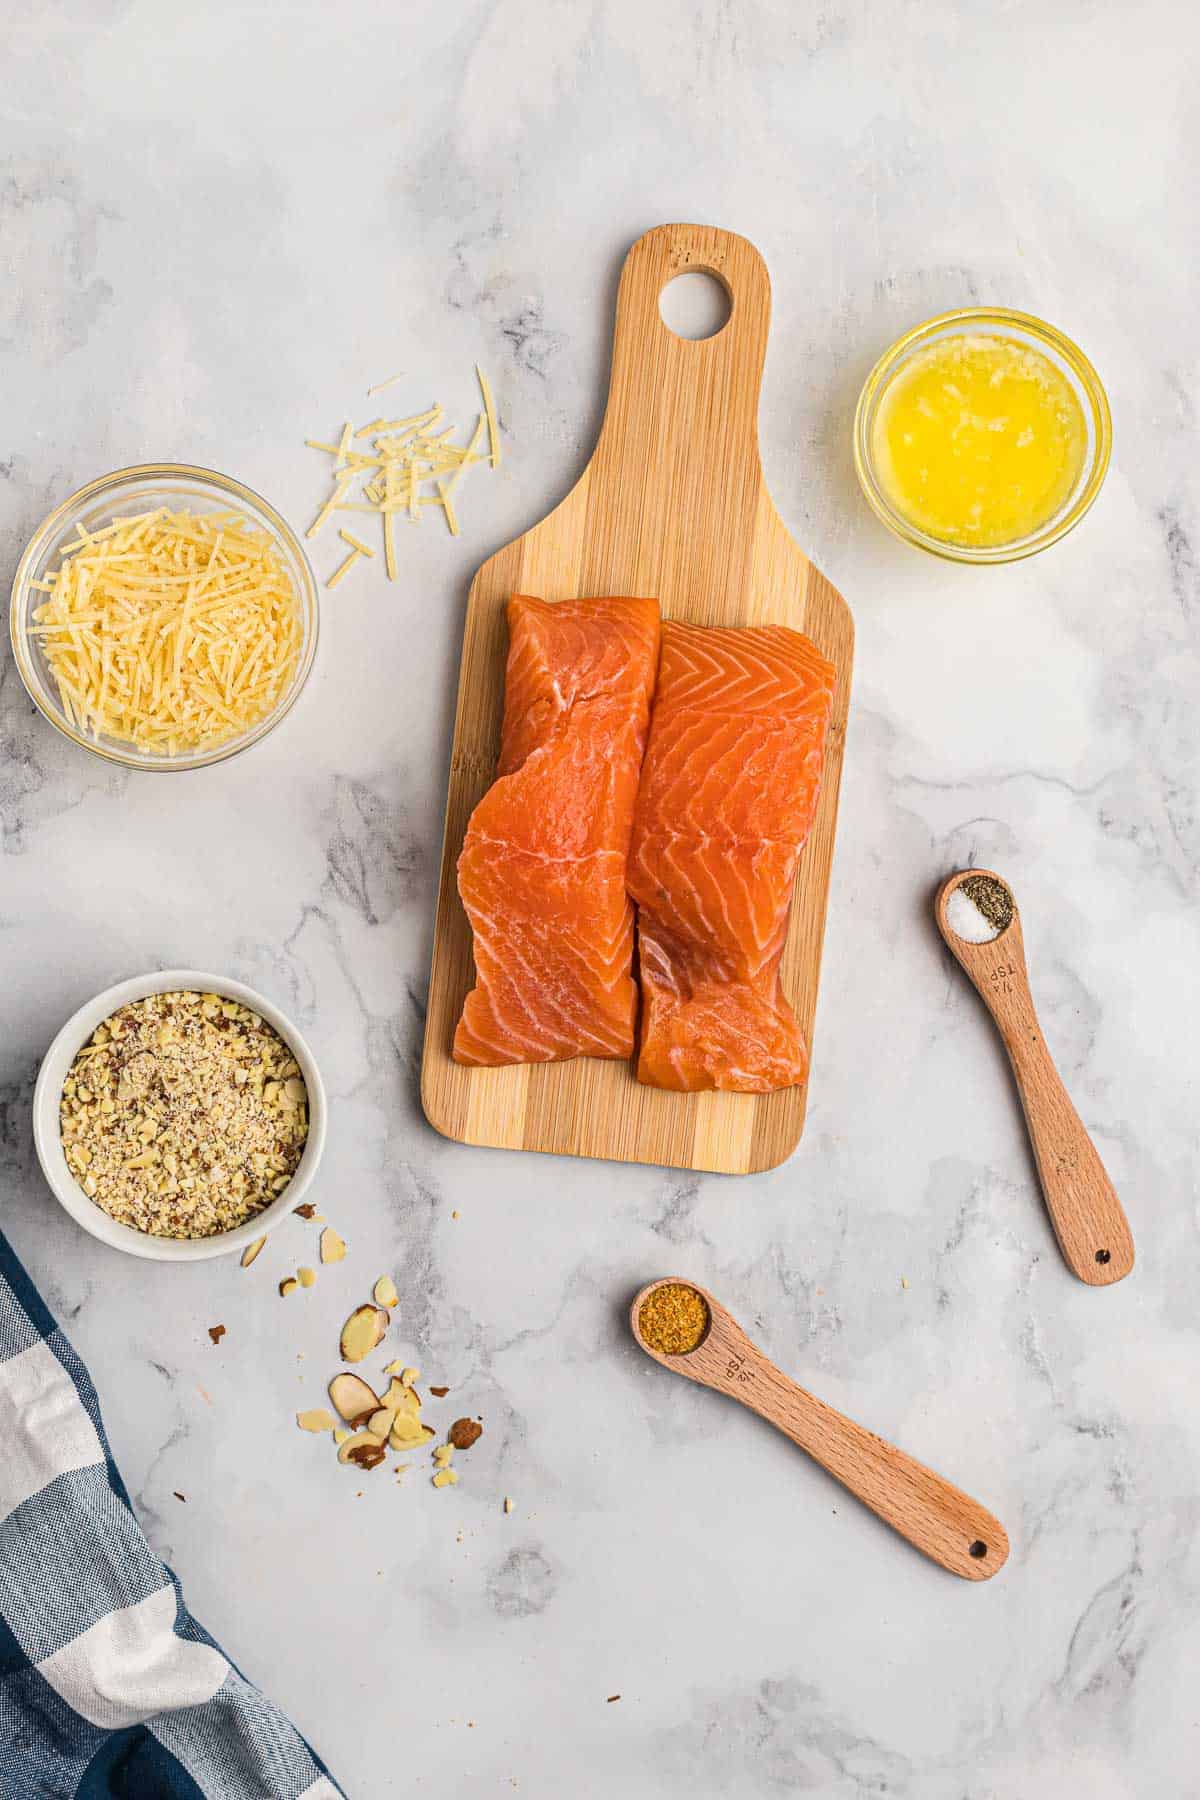 Overhead view of ingredients needed ot make salmon with almonds and parmesan.